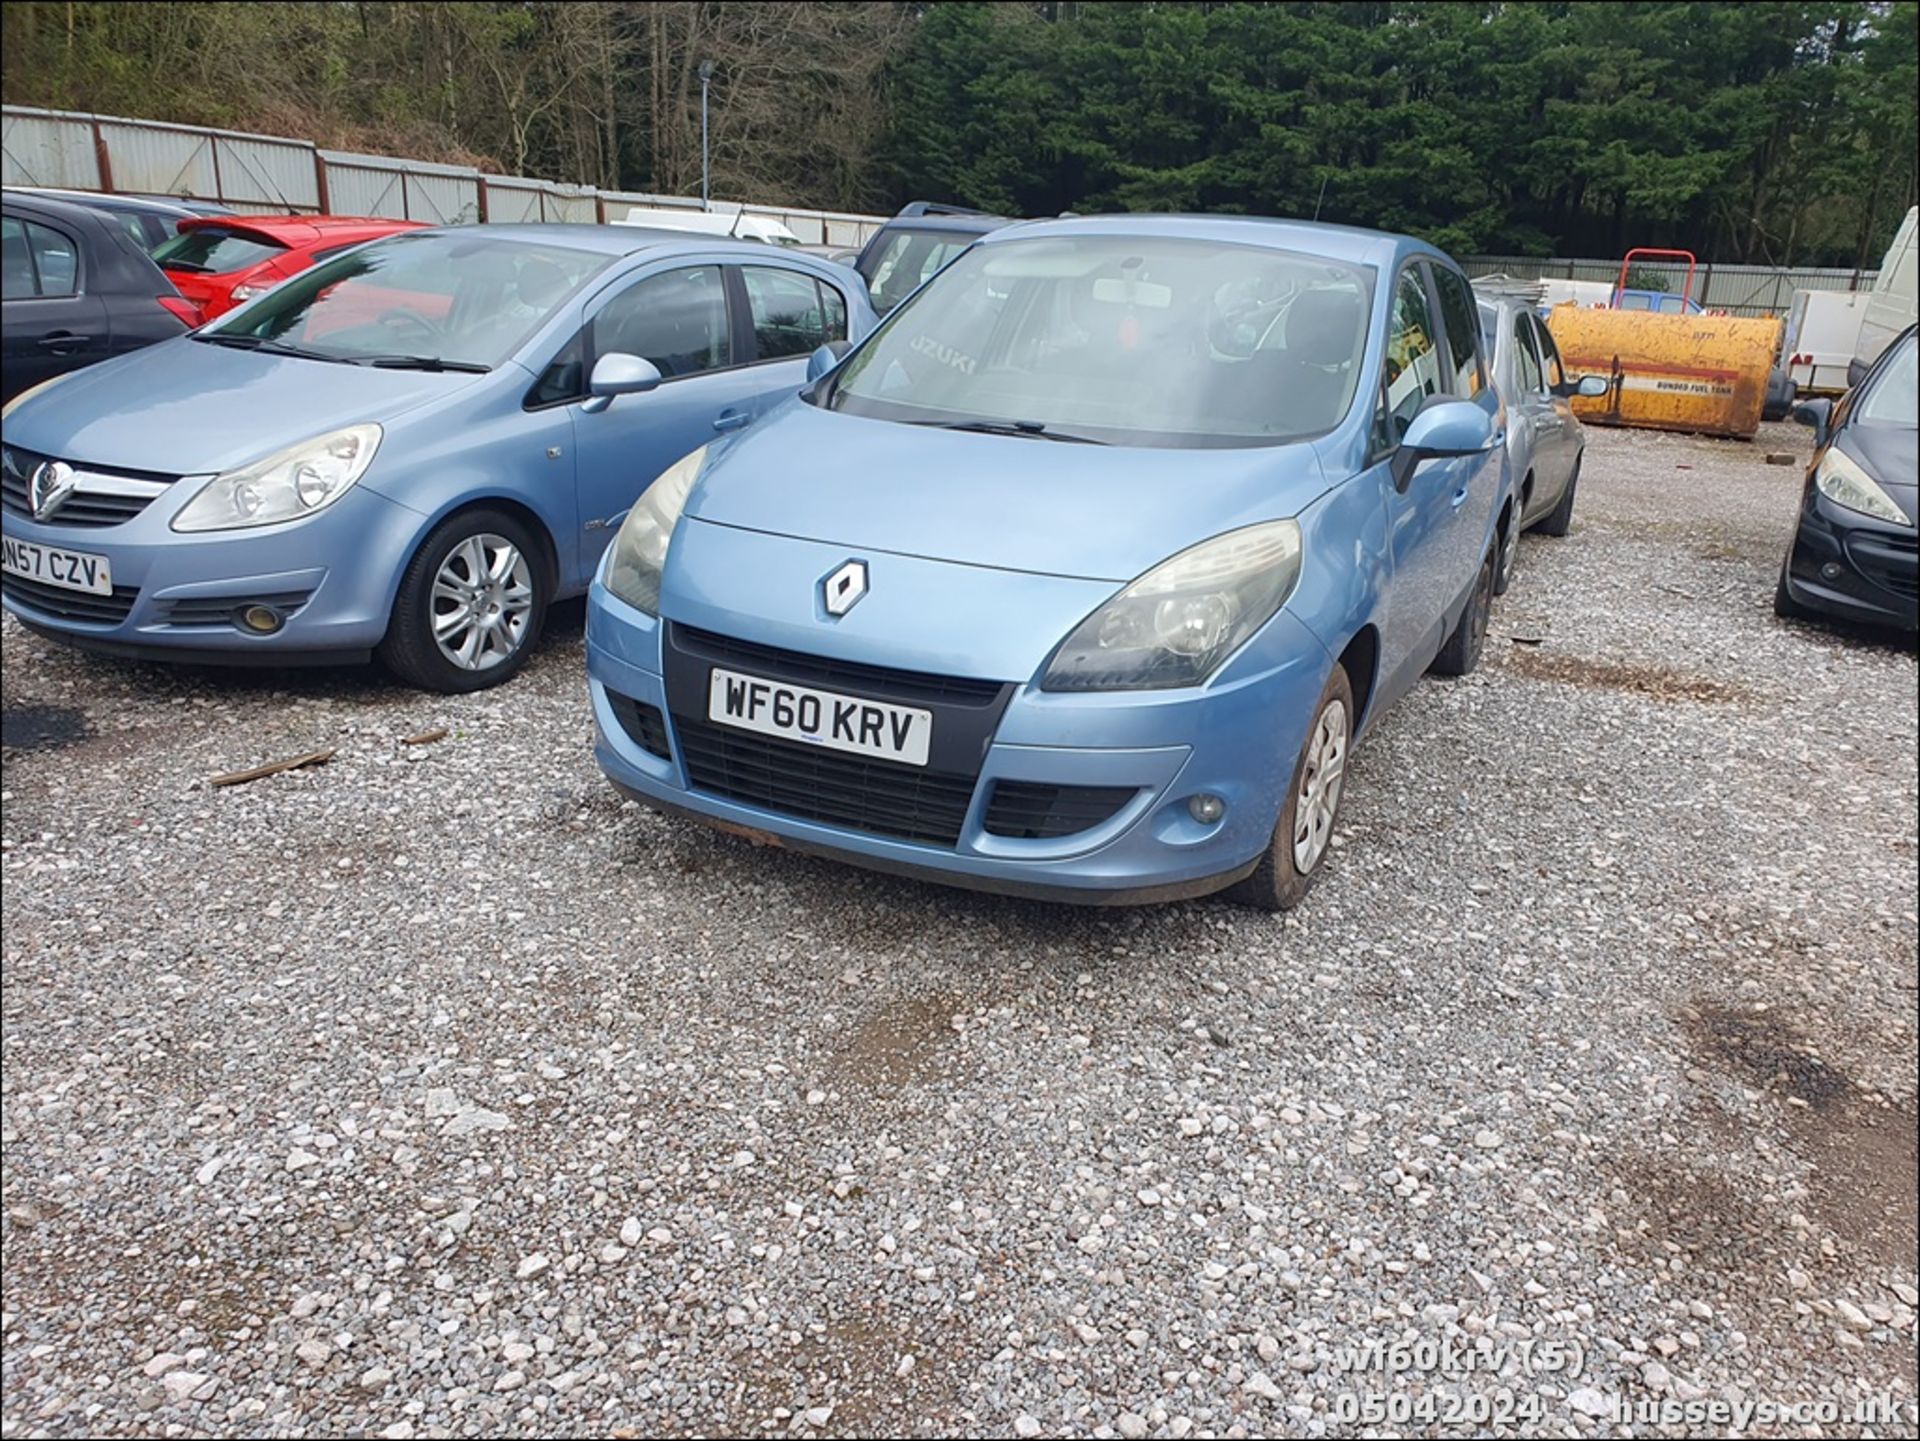 10/60 RENAULT SCENIC EXPRESSION DCI 105 - 1461cc 5dr MPV (Blue) - Image 6 of 50